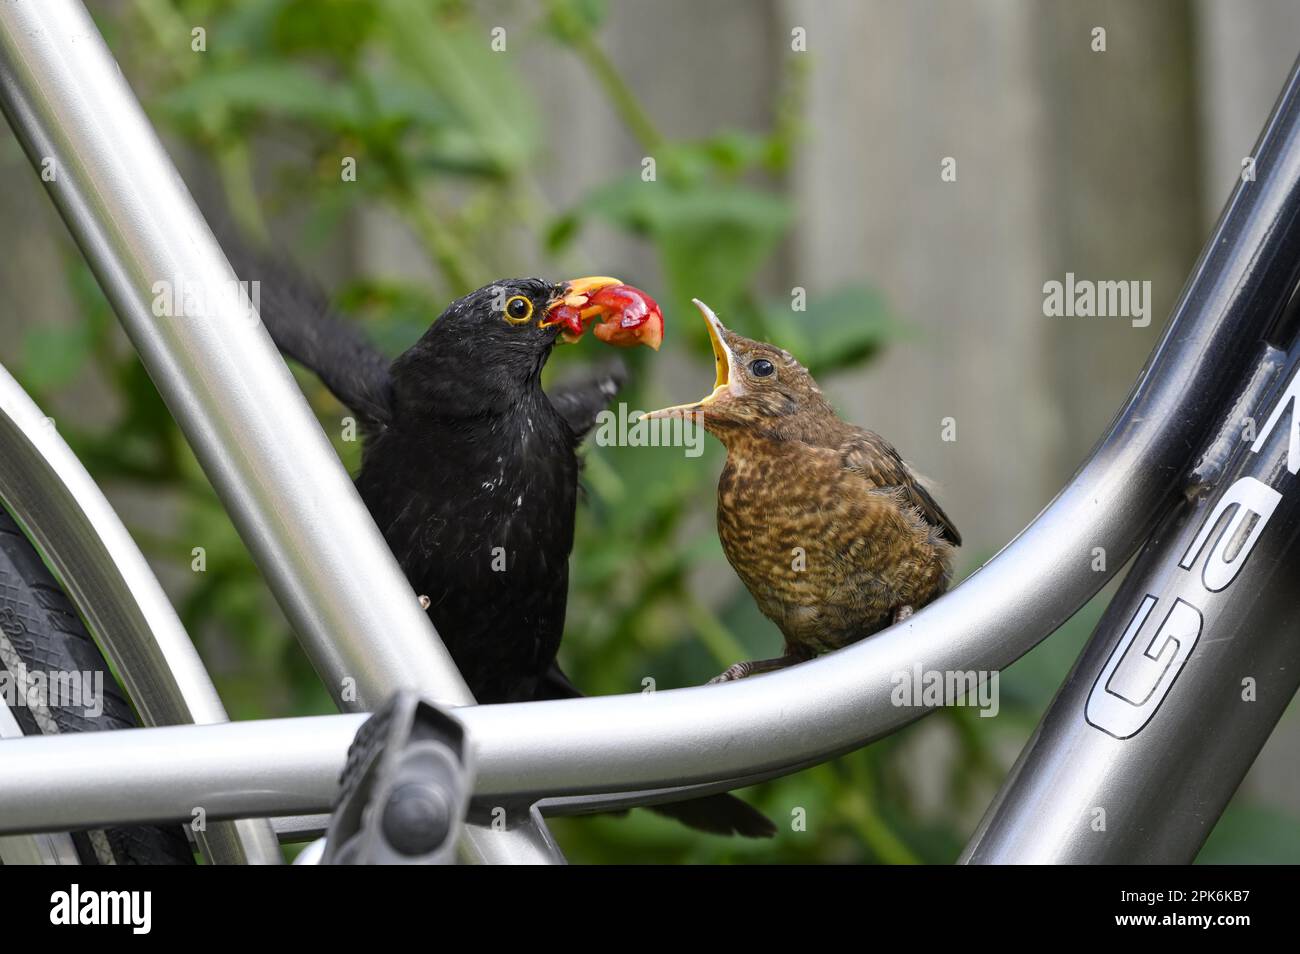 Blackbird (Turdus merula), almost fledged young bird, sitting on a bicycle, being fed by the male, Texel Island, North Sea, North Holland, Netherlands Stock Photo